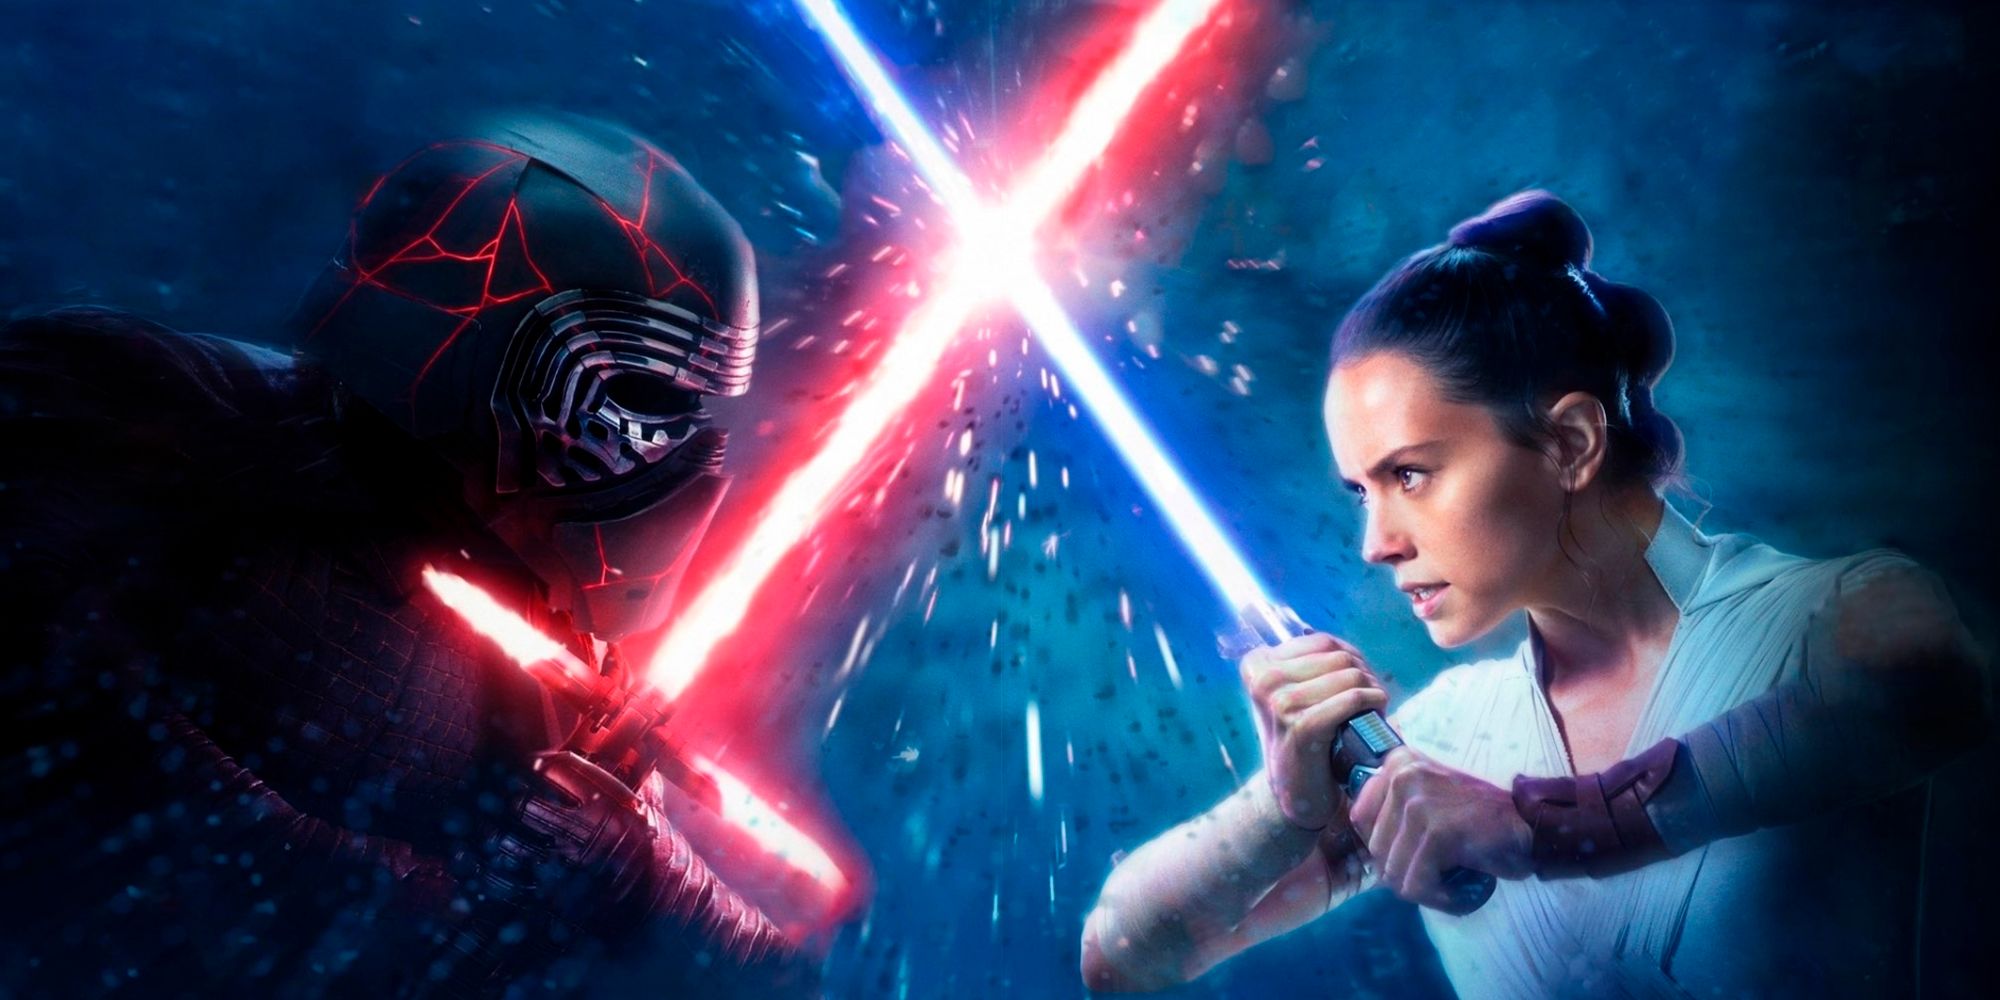 Kylo and Rey fight in Star Wars Rise of Skywalker